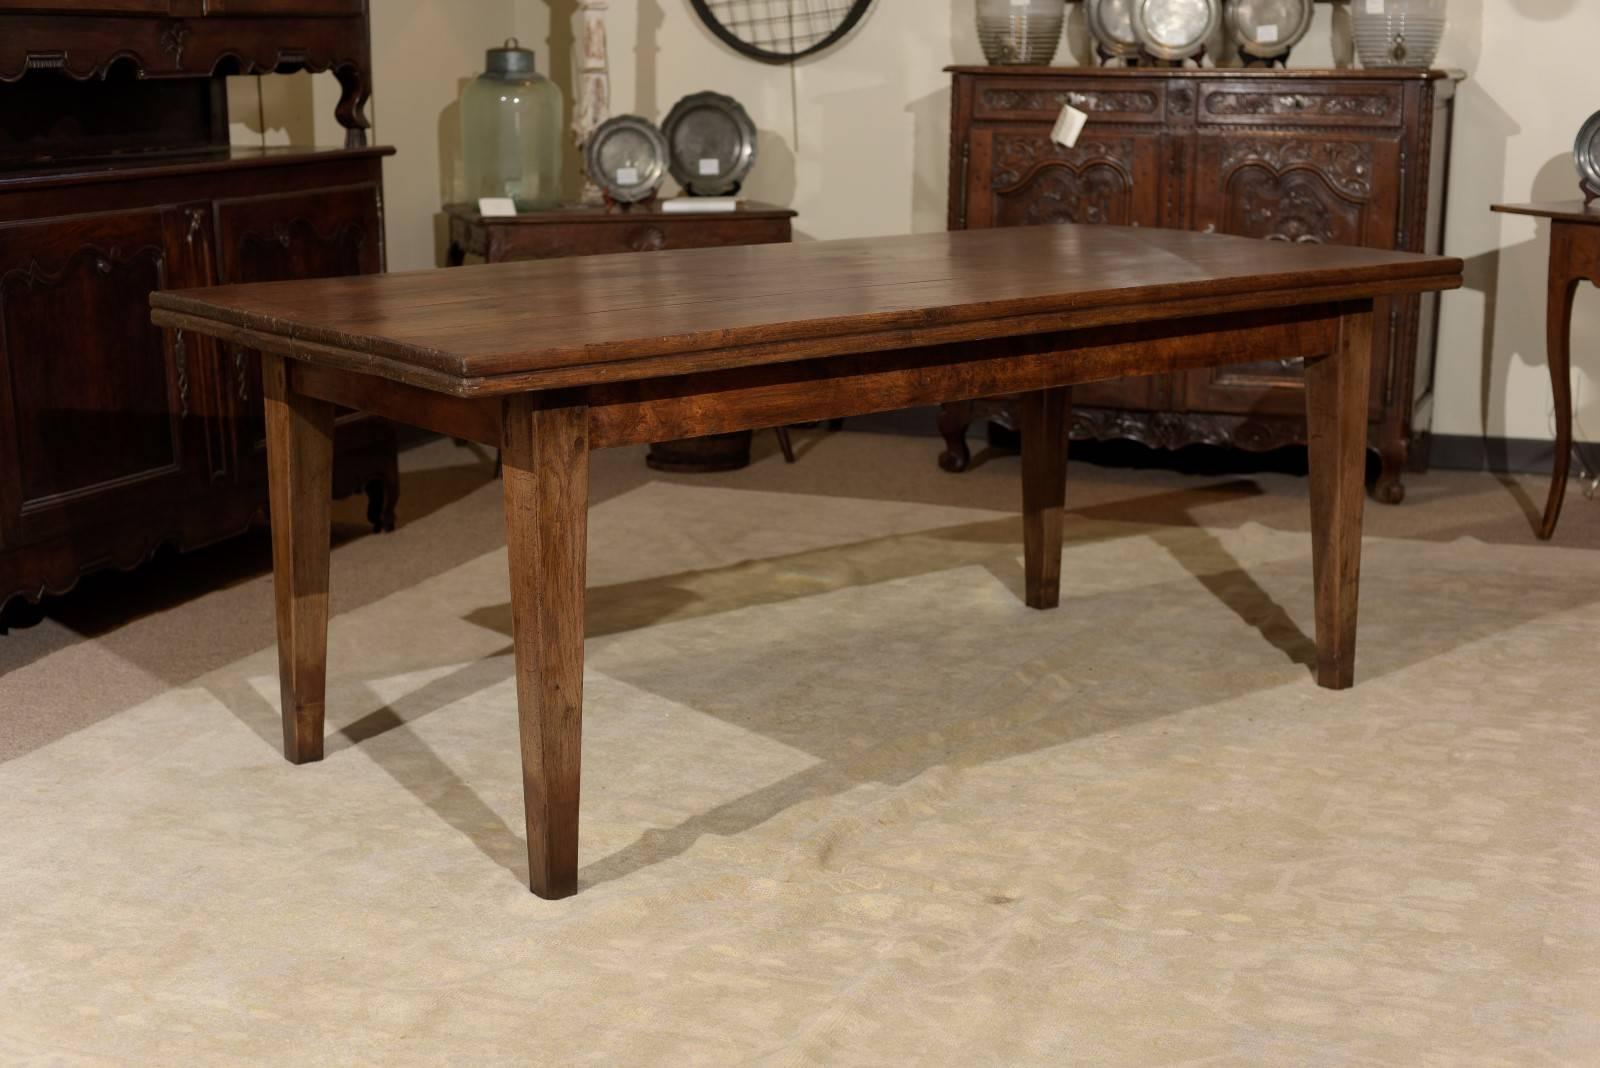 19th century French farm table, circa 1870
We've never seen a farm table with a double top! The double top gives the table an extra dimension. The table came from Brittany and has a nice patina along with a warm color brown. Another distinction